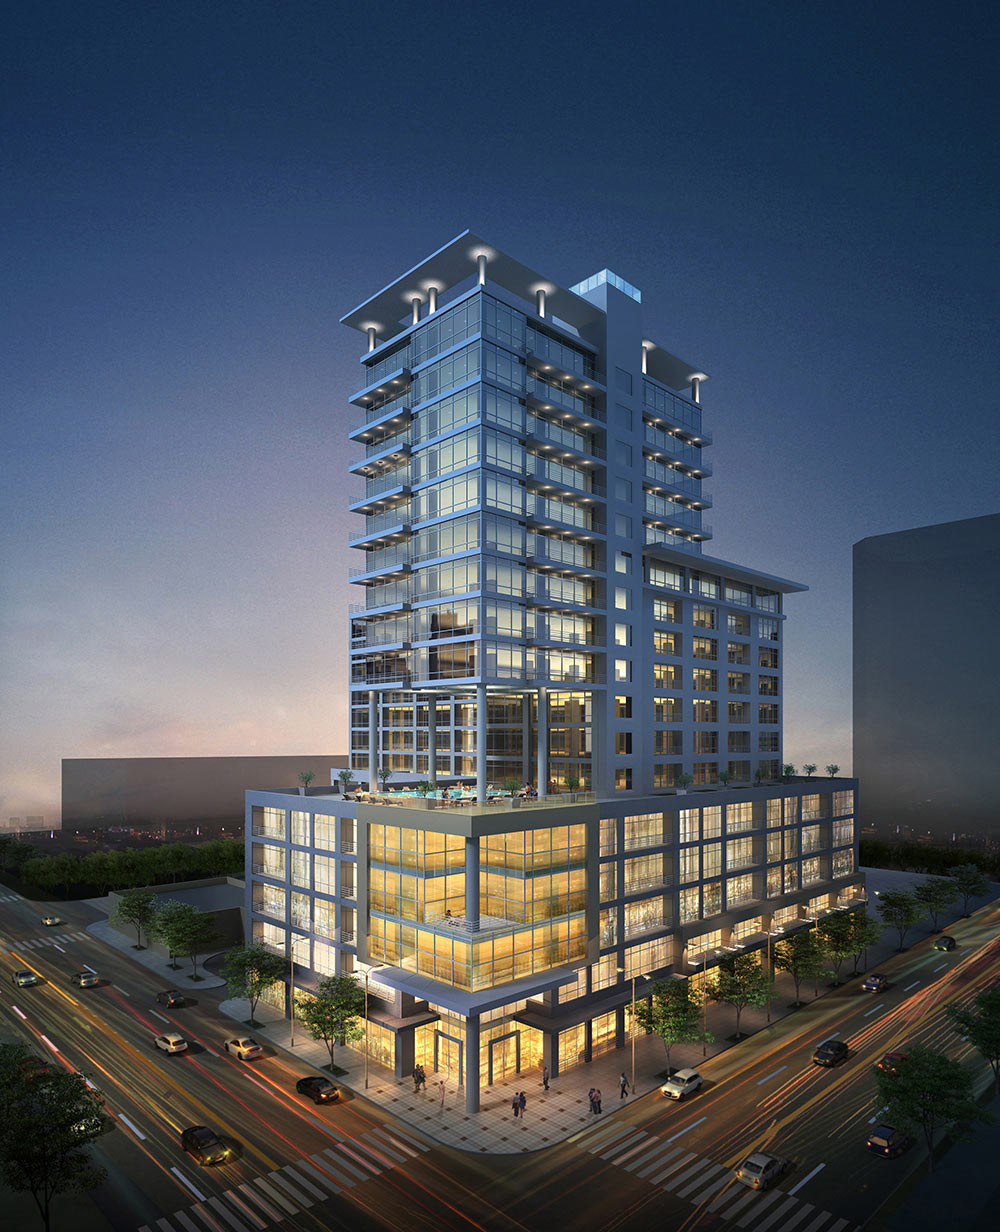 Humphreys Partners Architects 8th And Lincoln Rendering Night